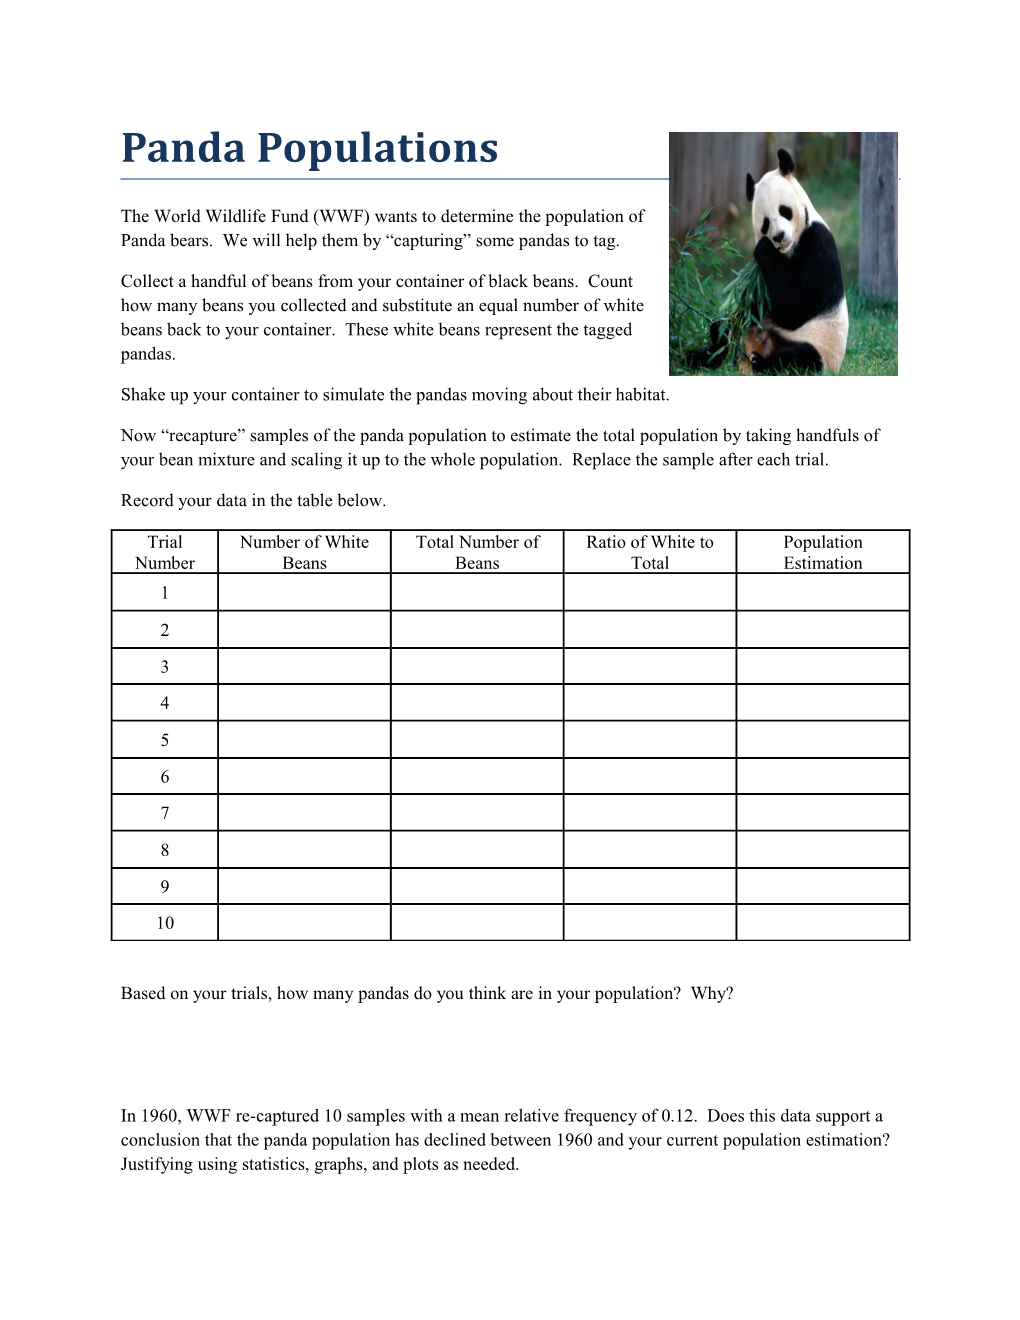 Shake up Your Container to Simulate the Pandas Moving About Their Habitat